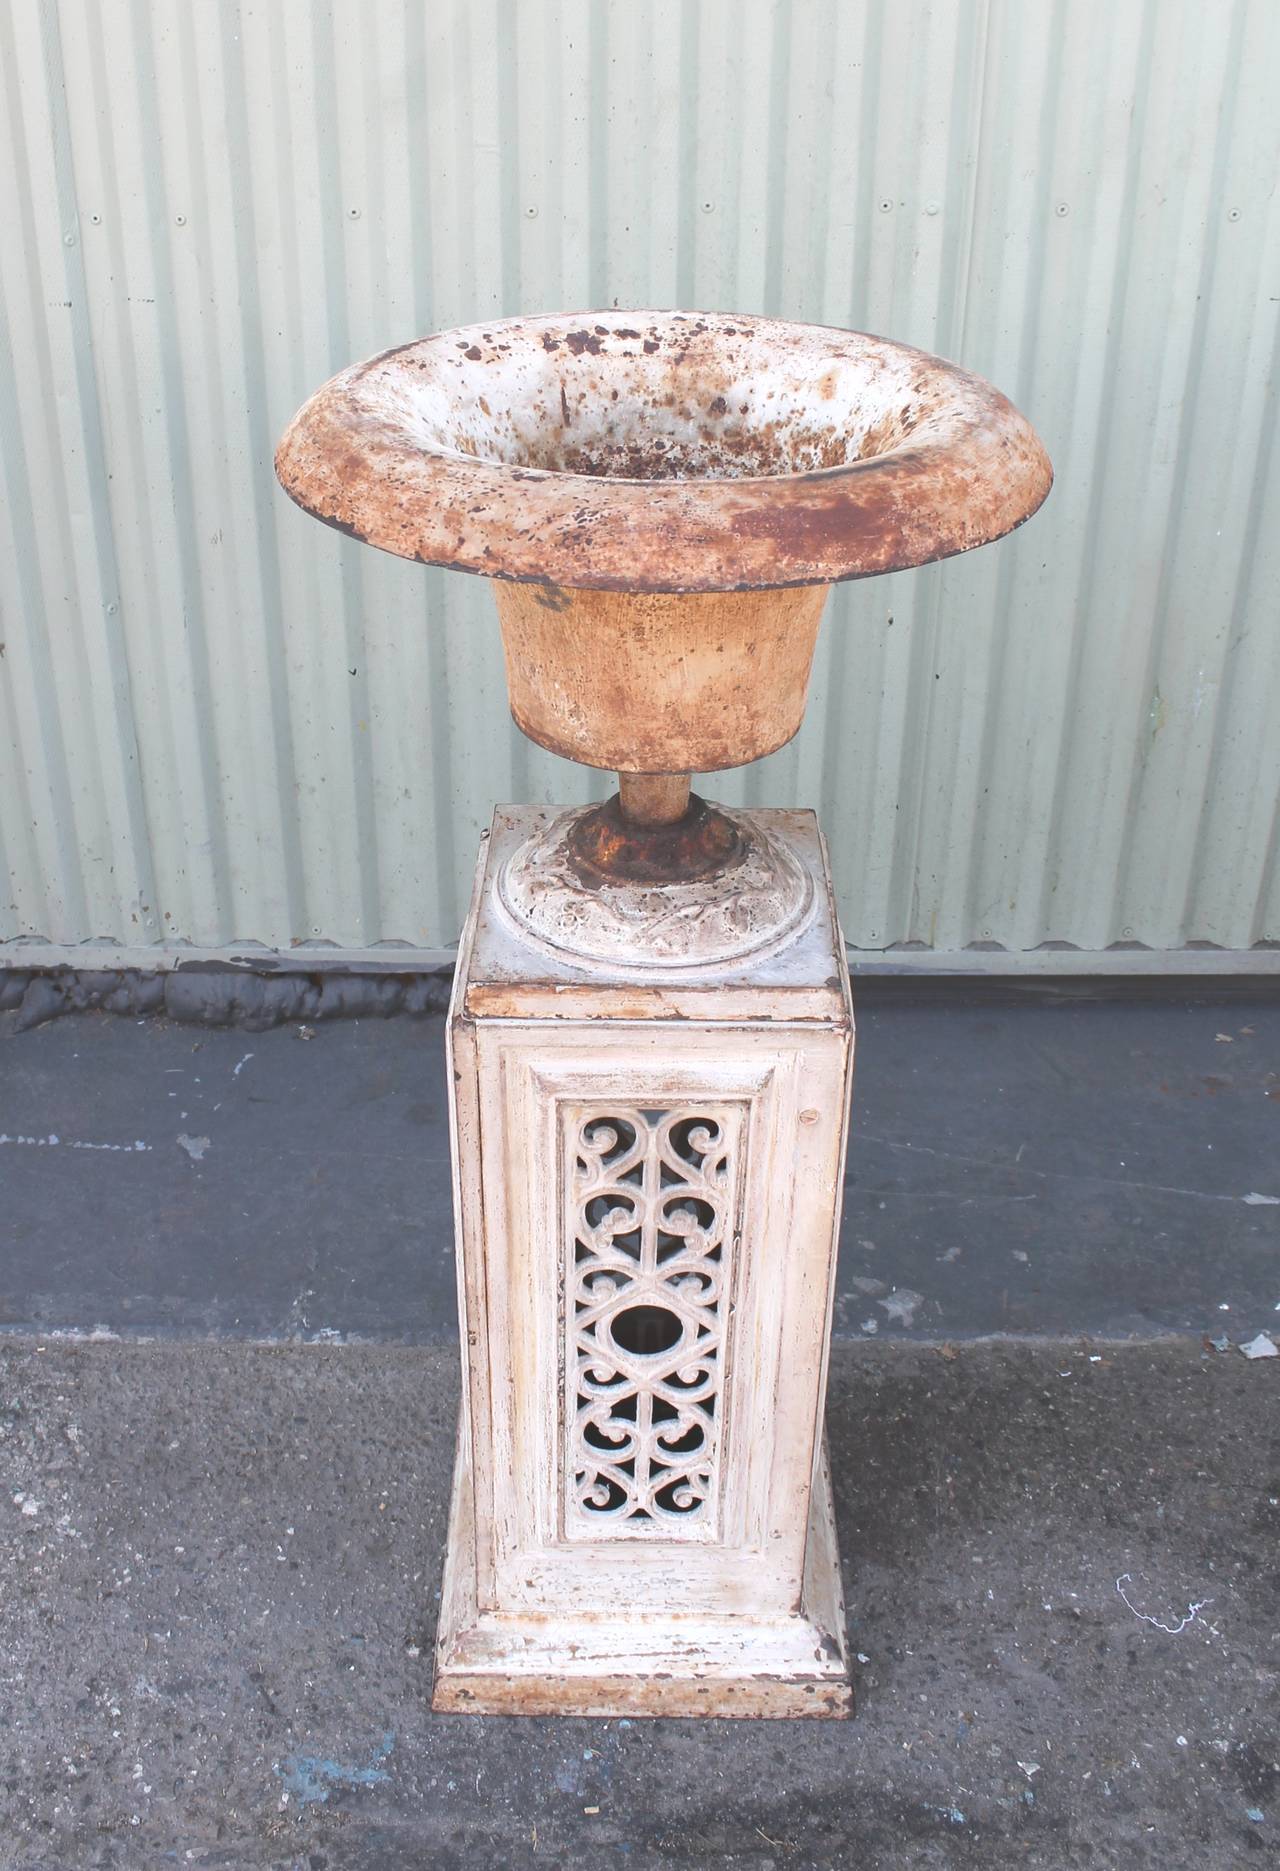 This early original white painted 19th century iron urn has a wonderful wide top form shape. It sits on the original painted iron plinth. This is most unusual this tall original painted base. They are a perfect set in great condition. Fantastic